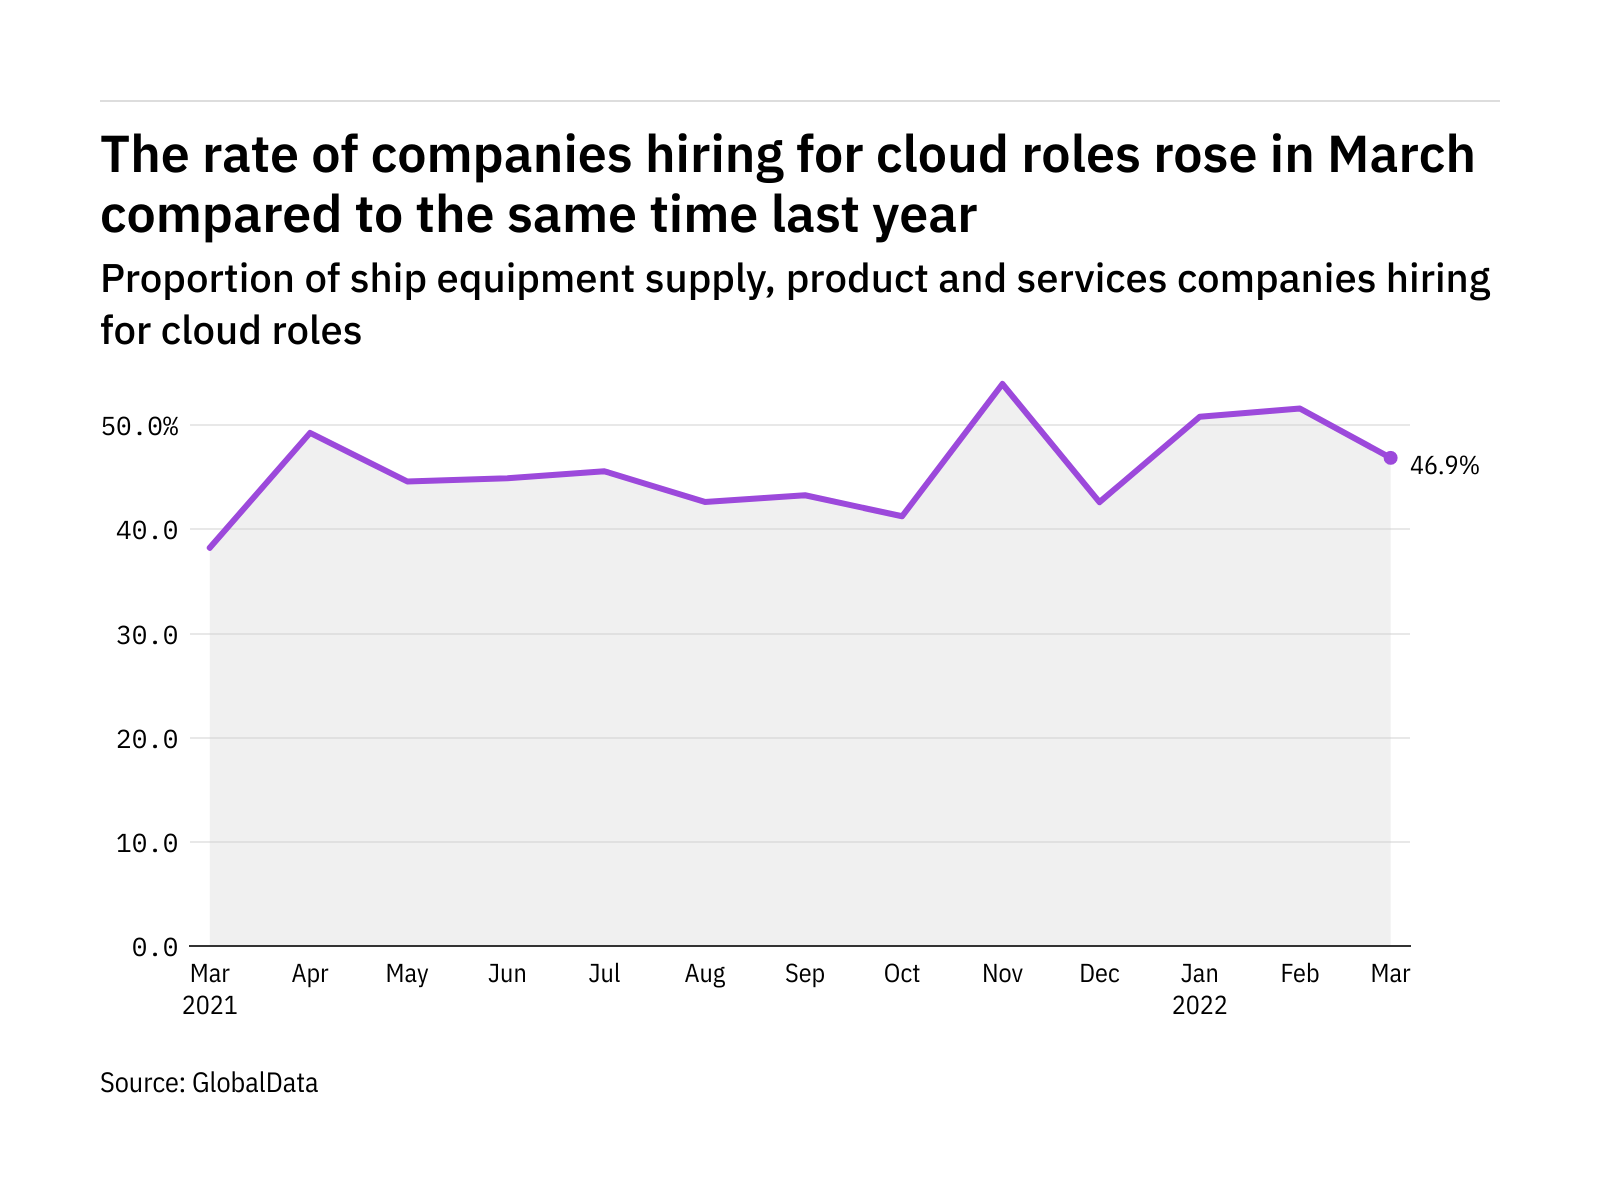 Cloud hiring levels in the ship industry rose in March 2022